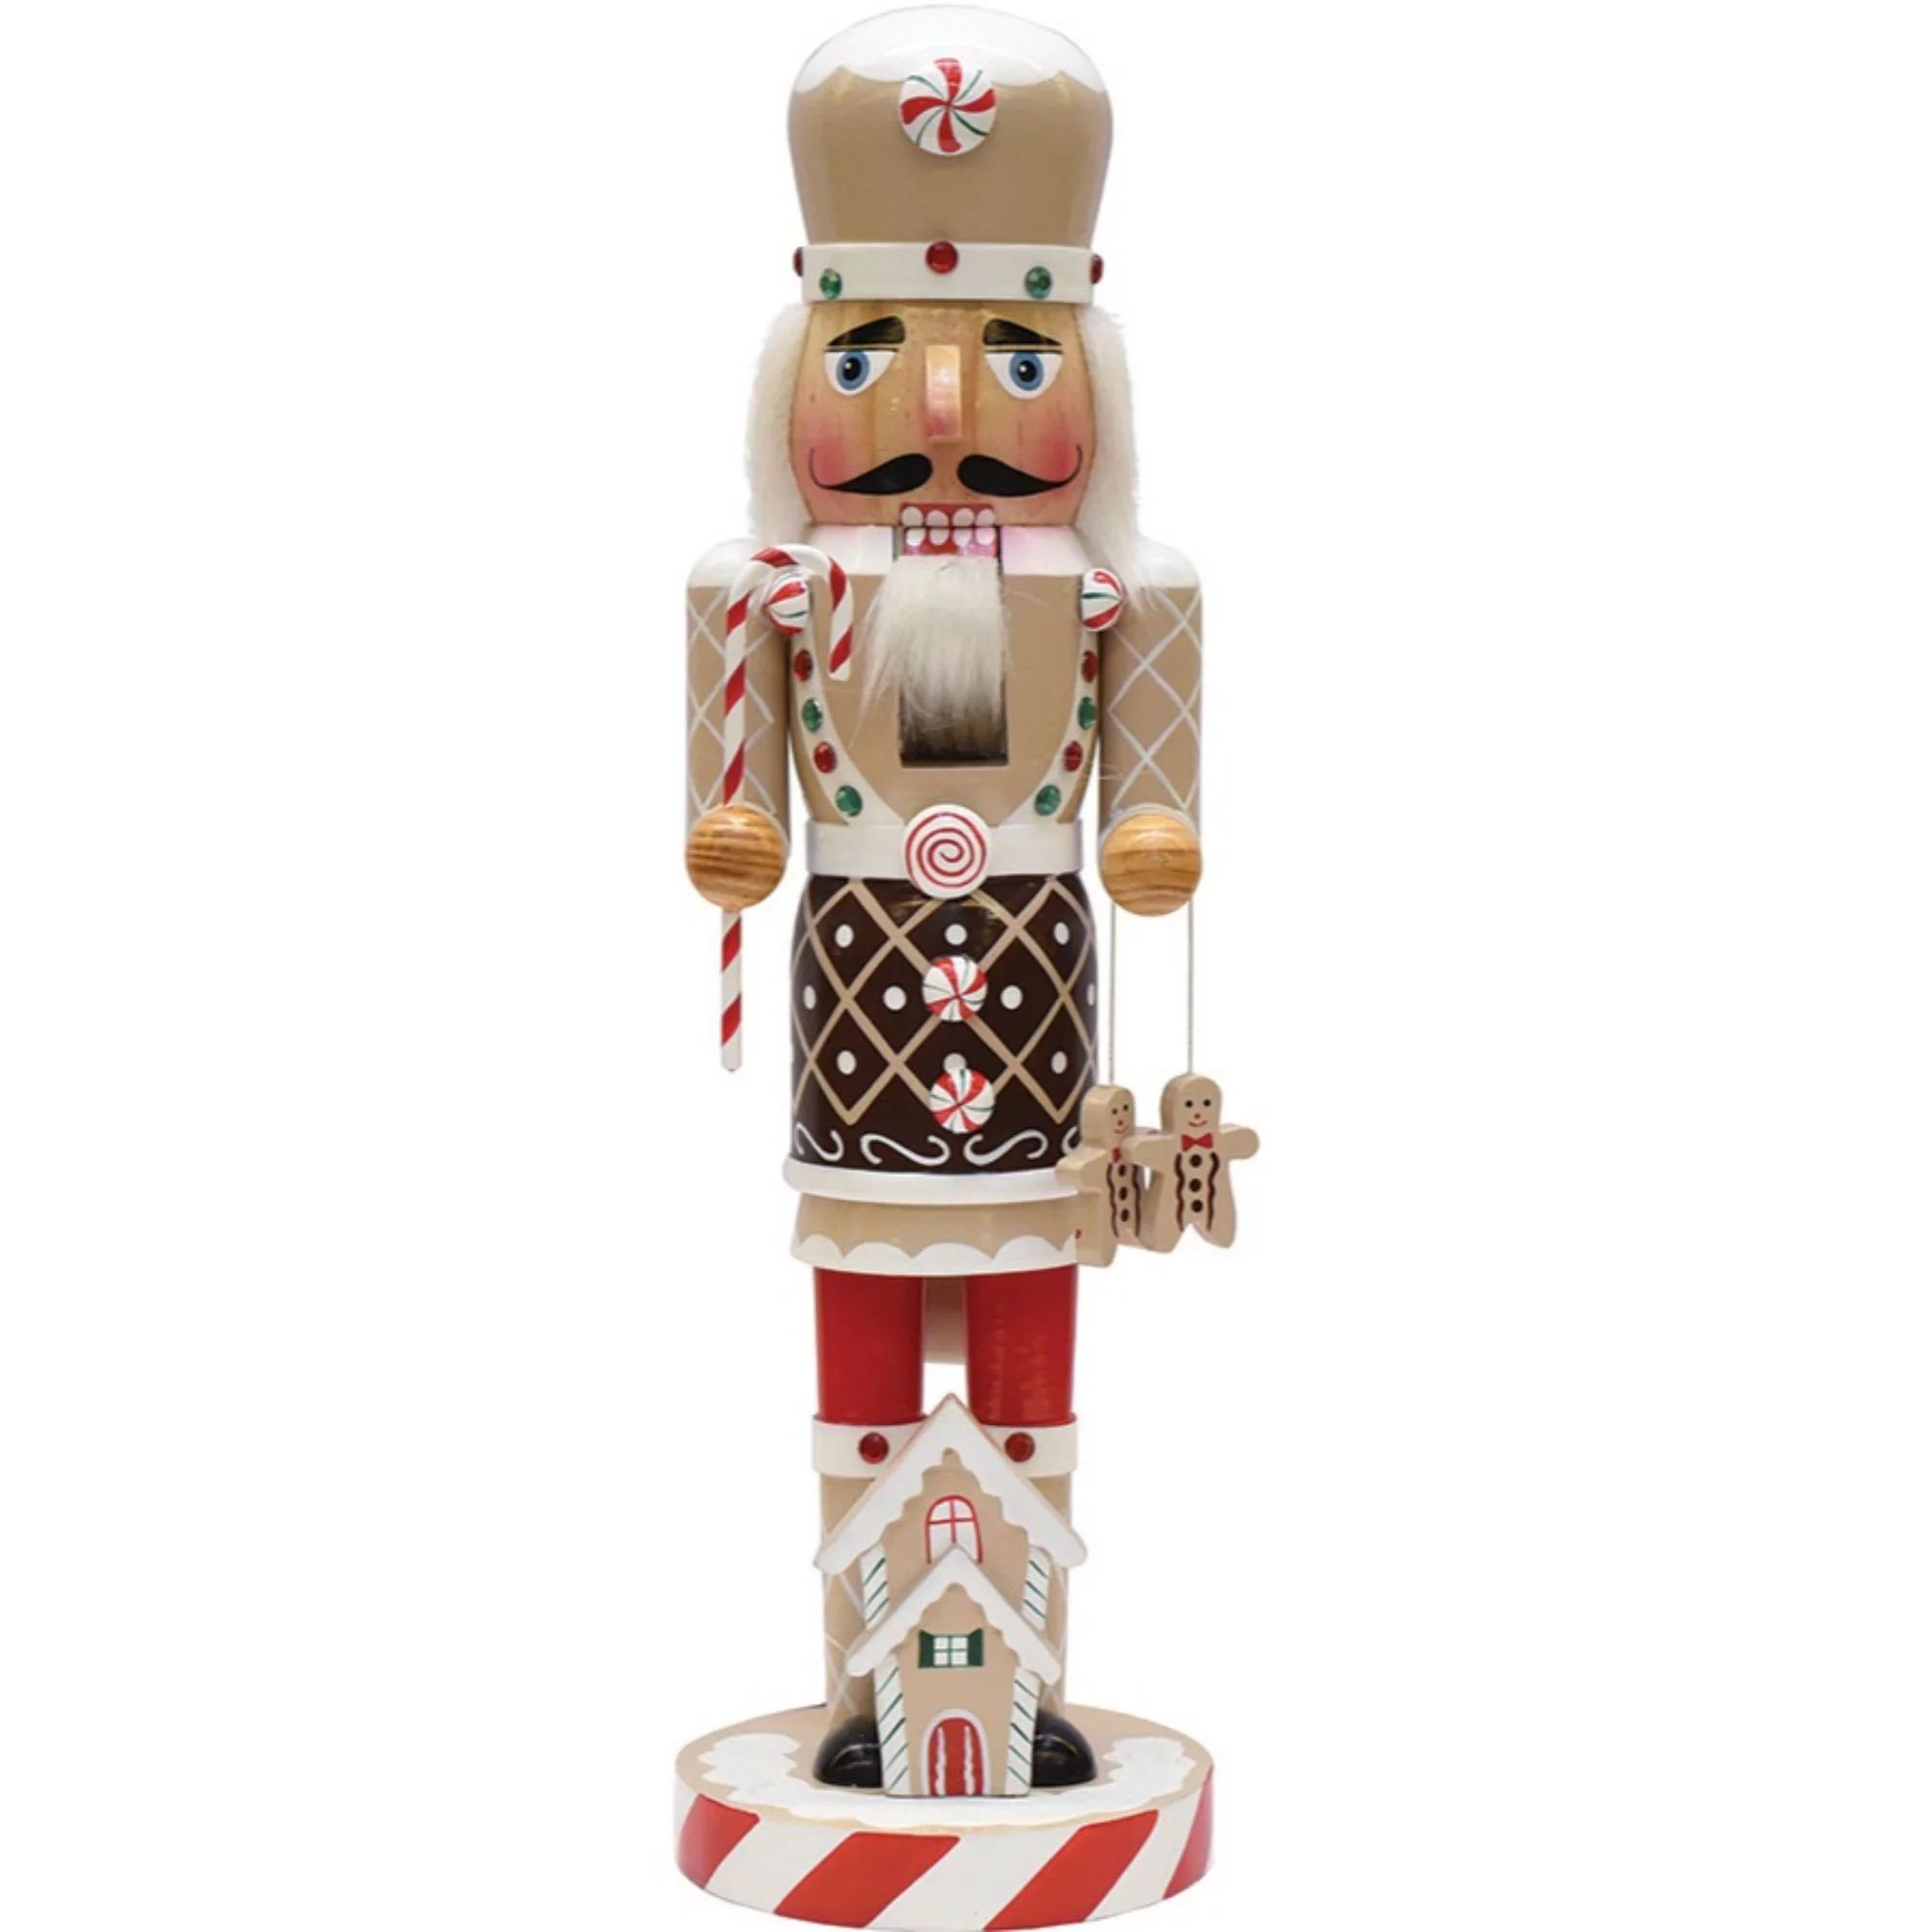 14" Beige and Red Wooden Christmas Nutcracker Chef with Gingerbread House Tabletop Figurine | Walmart (US)